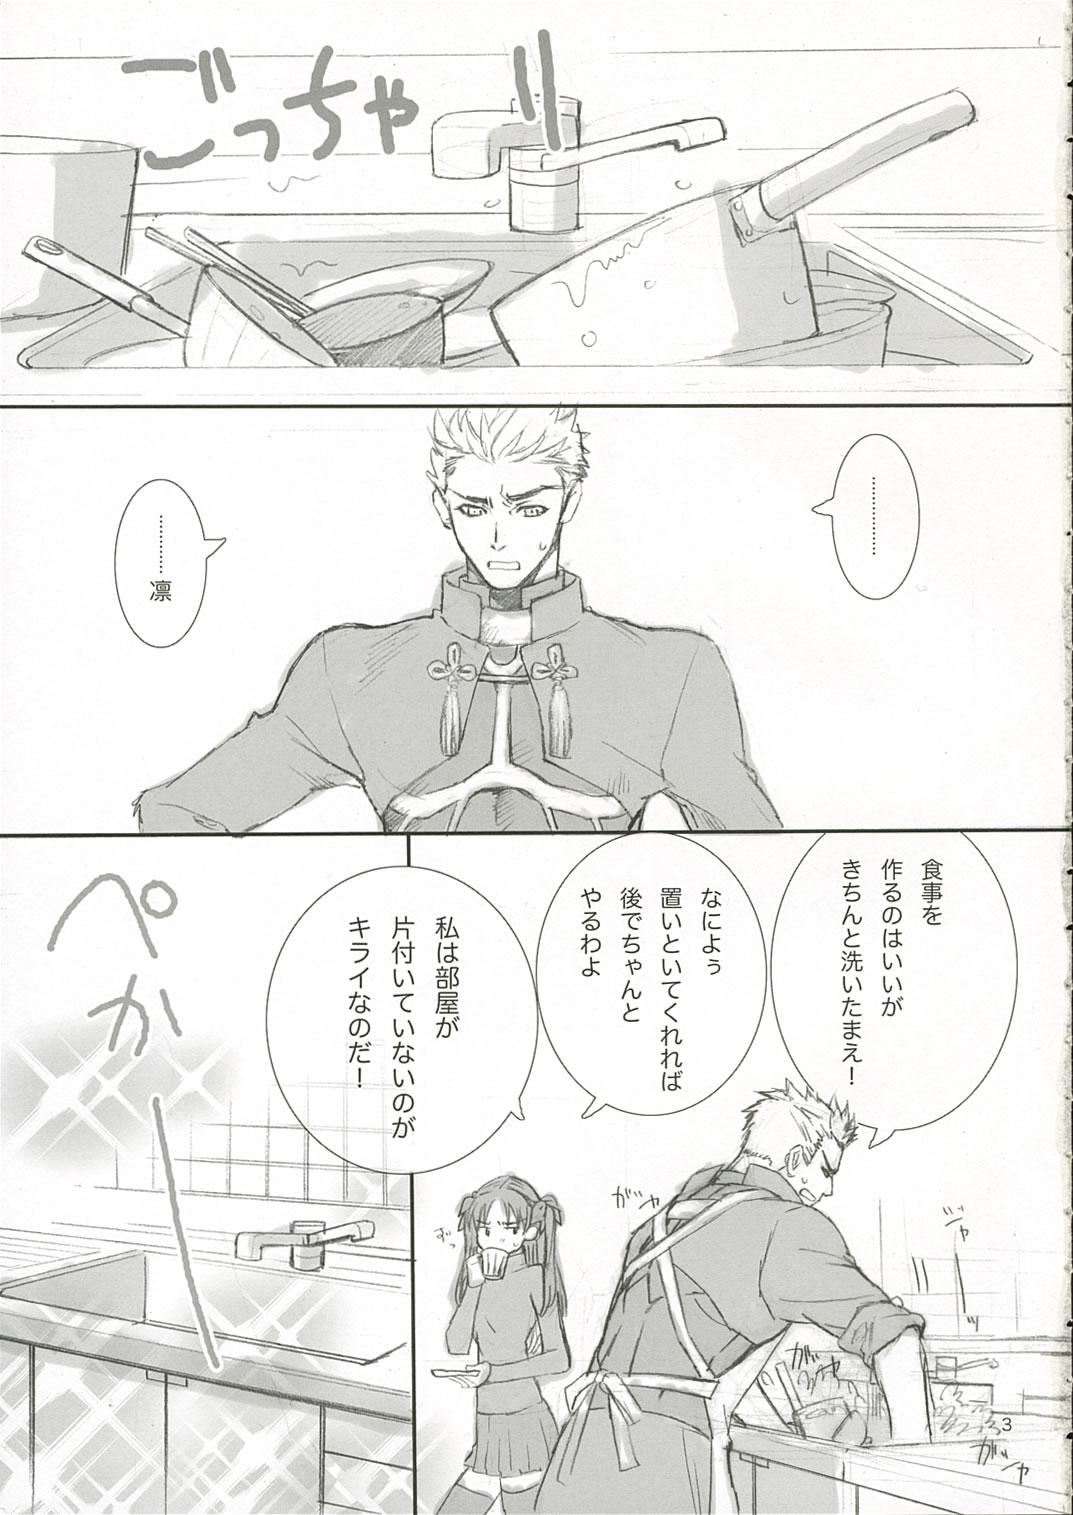 Spy Camera Candy - Fate stay night Squirt - Page 2